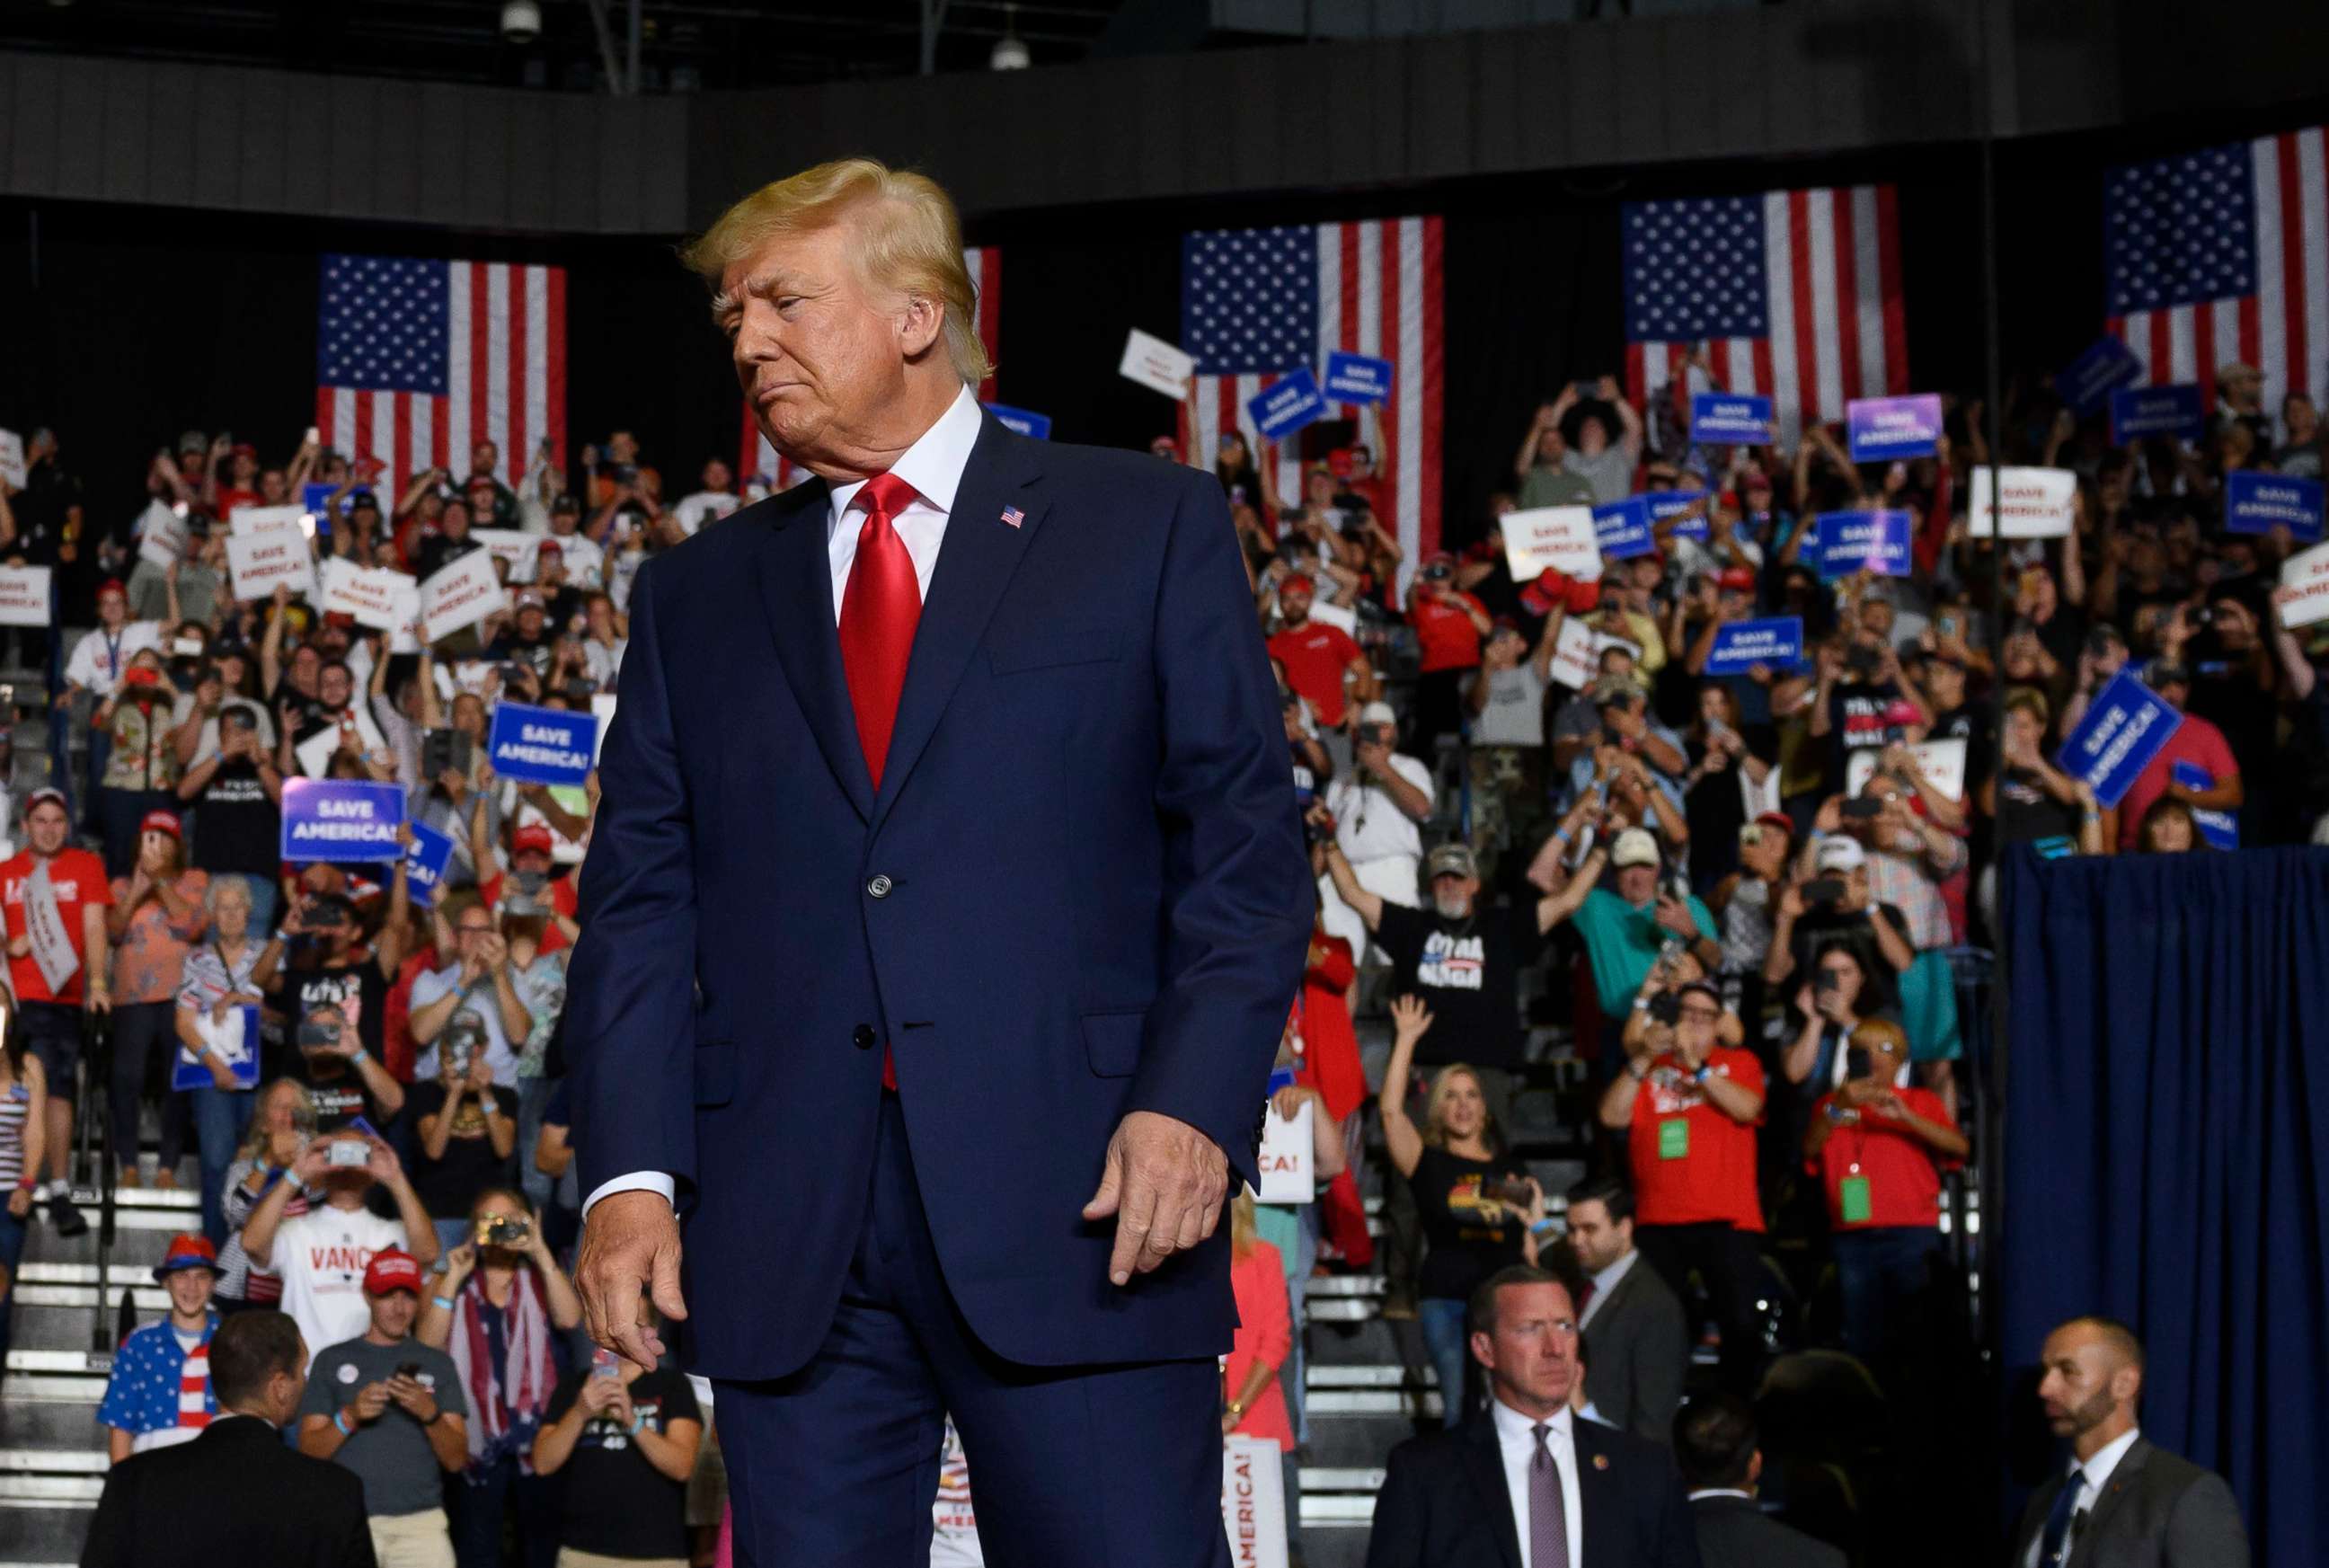 PHOTO: Former President Donald Trump enters the stage at a Save America Rally in Youngstown, Ohio, Sept. 17, 2022.